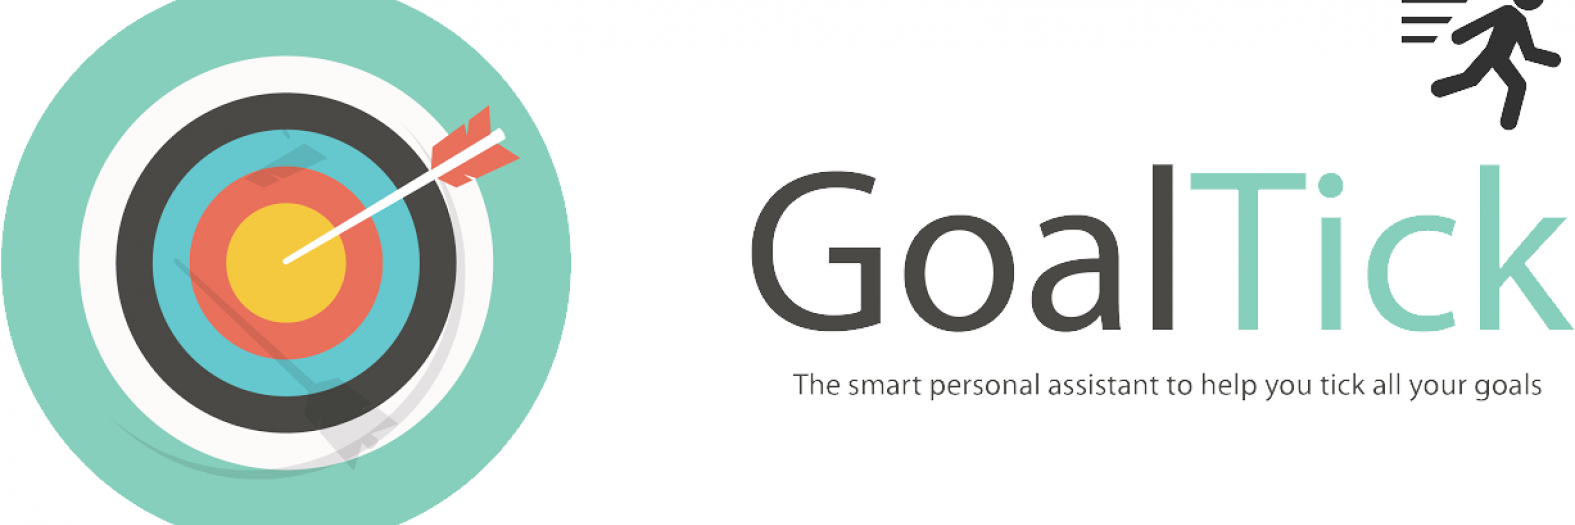 The personal assistant to help you tick all your fitness goals!